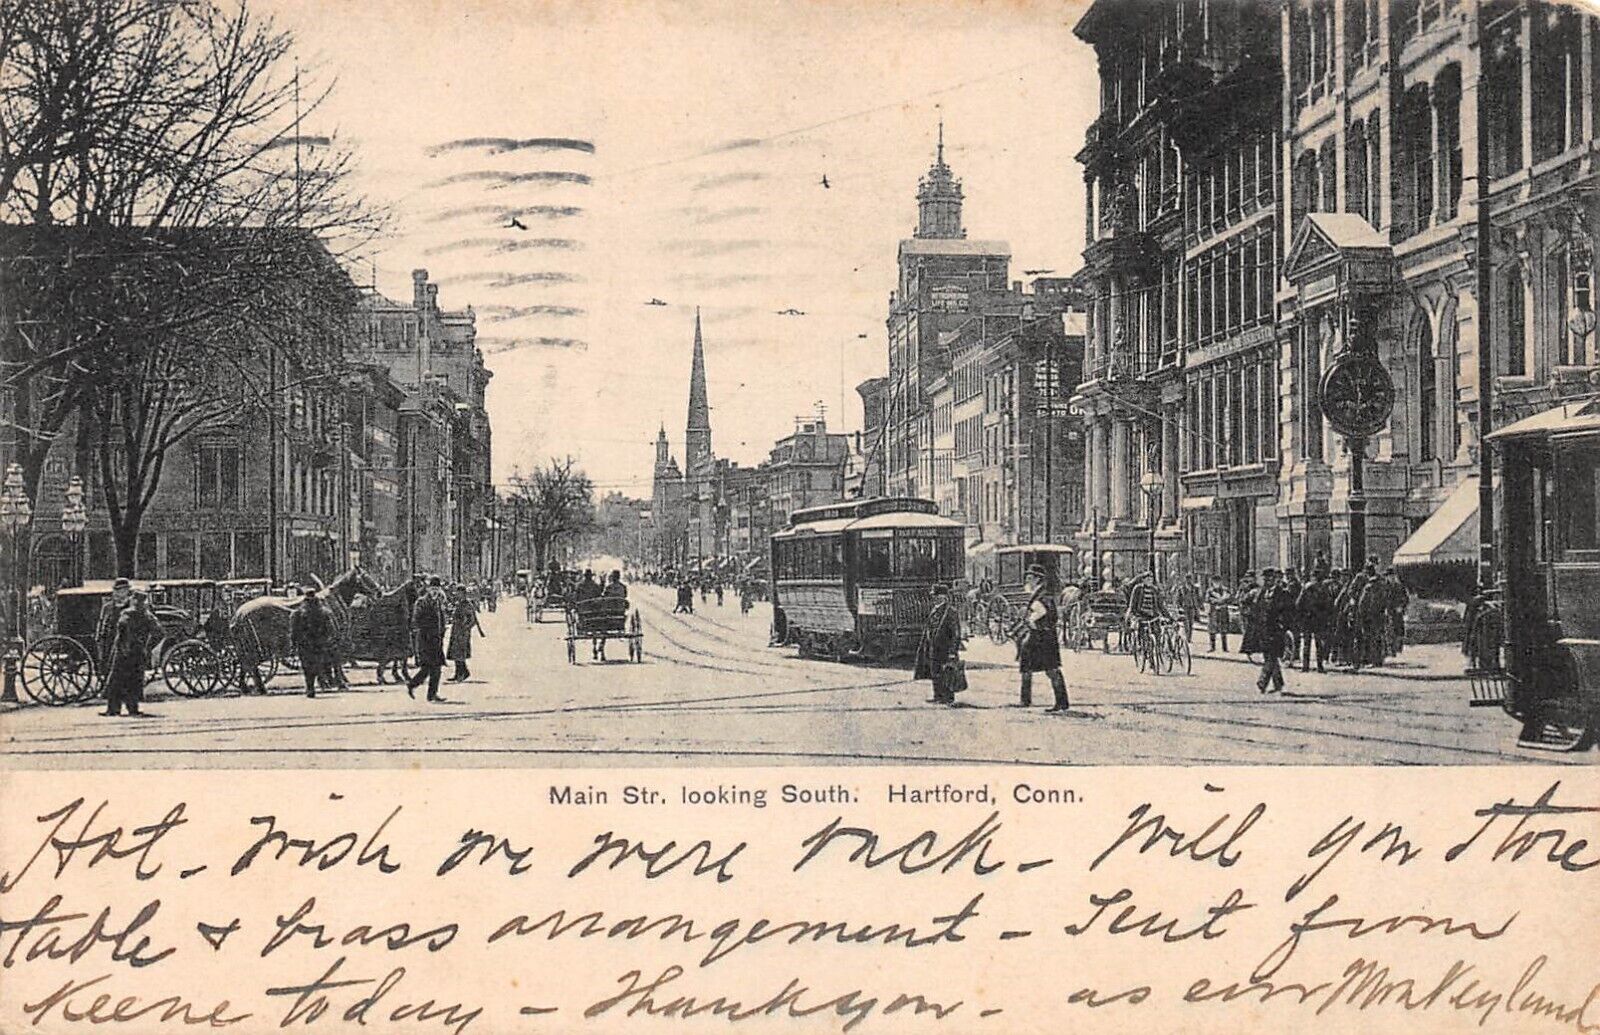 Main Street Looking South Hartford Connecticut Trolley 1908 Postcard  7017